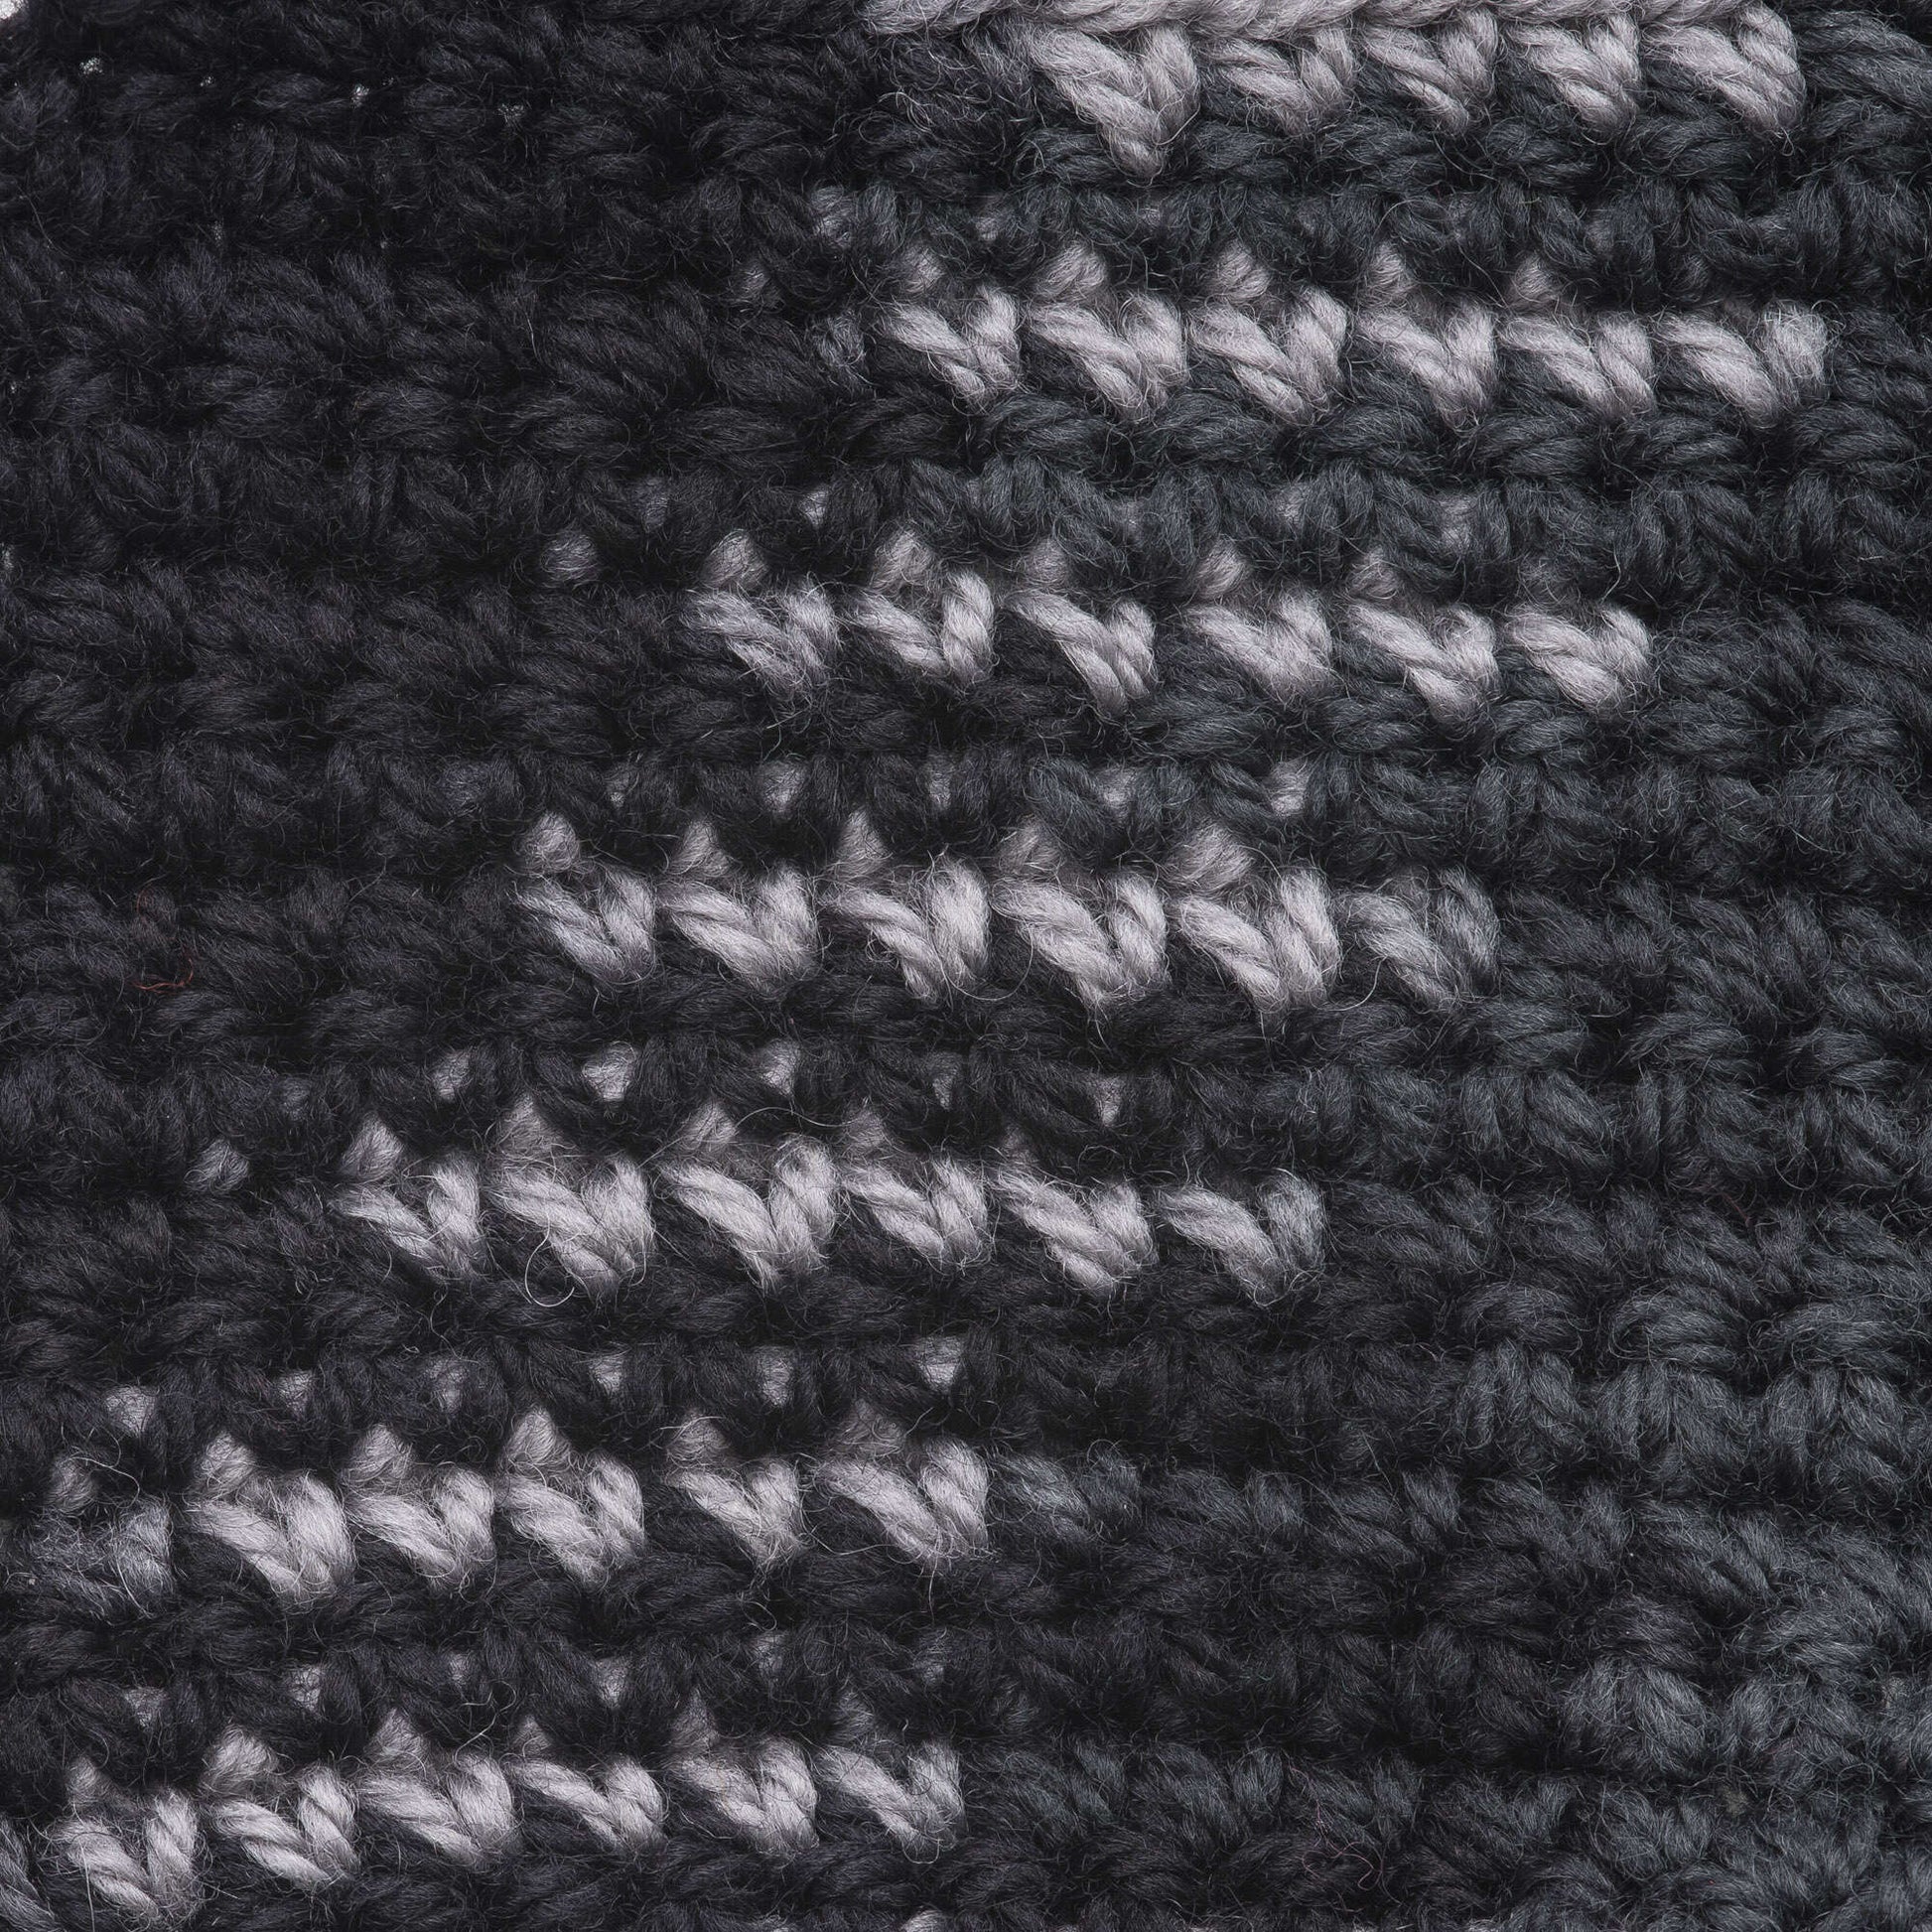 Patons Classic Wool Worsted Yarn - Discontinued Shades Shades of Gray